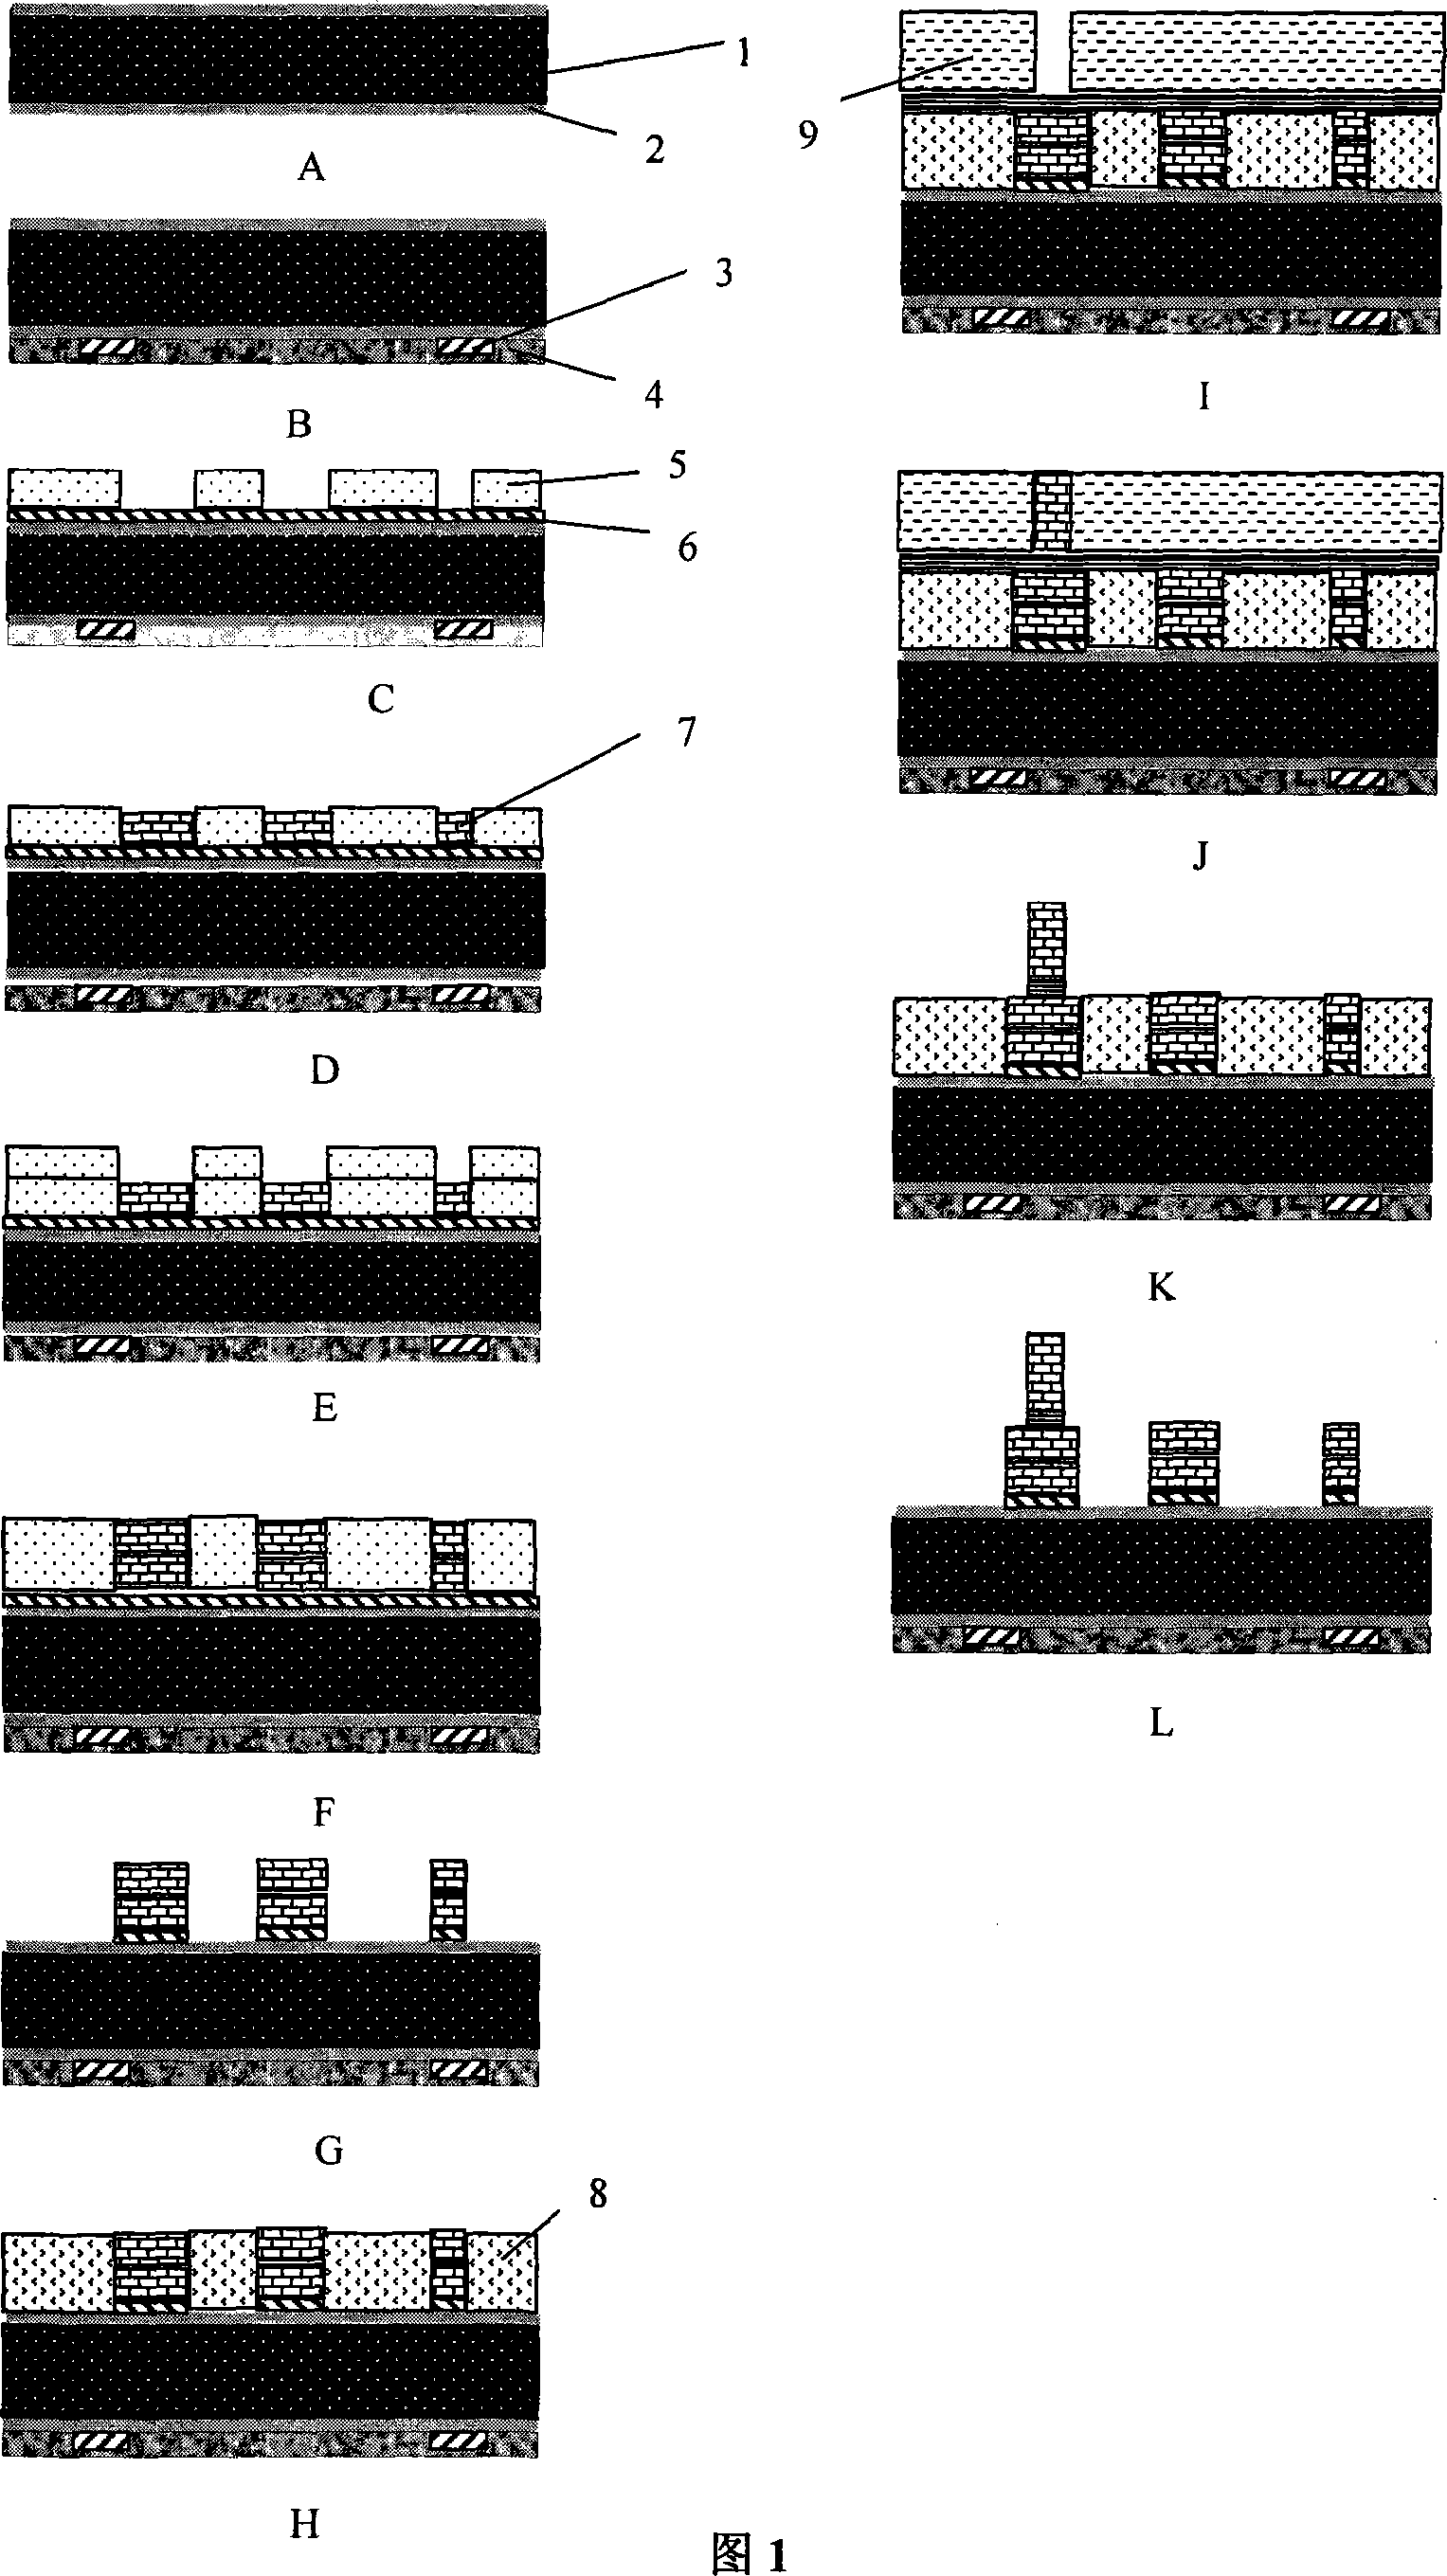 Method for realizing microstructure on pyrolytic graphite chip